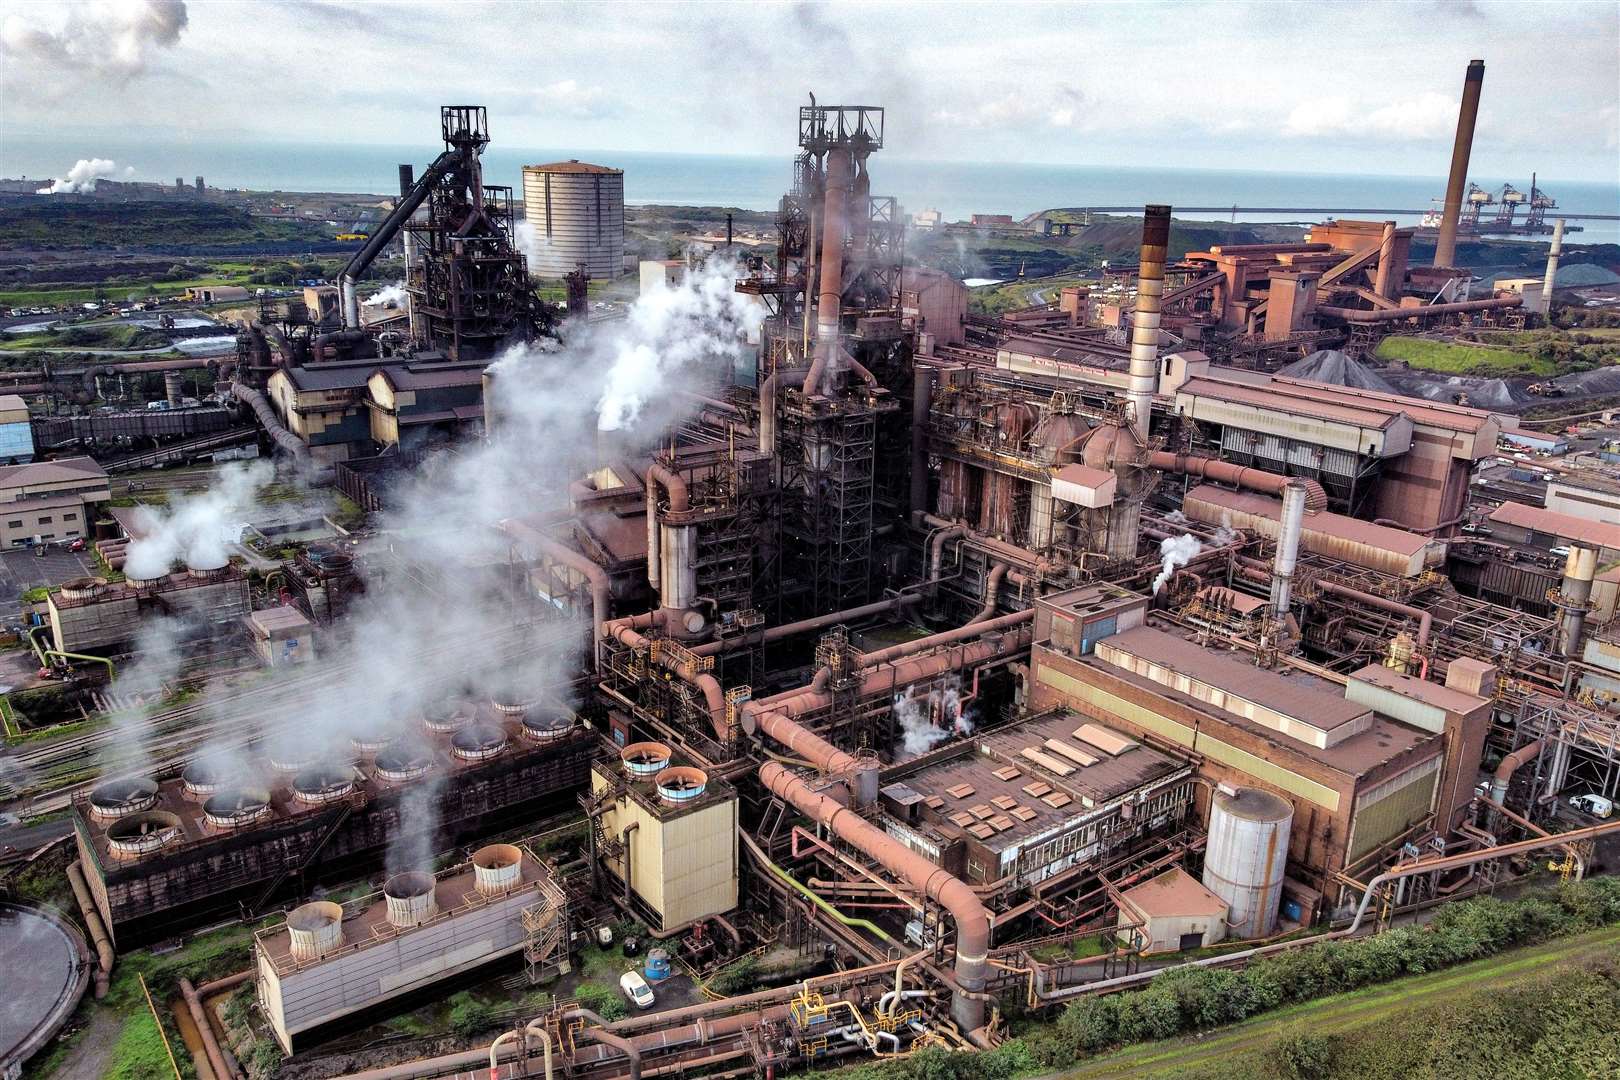 Tata Steel plans to shut both blast furnaces before a new electric arc furnace is ready, which workers say would be a ‘massive hit on the job count’ (Ben Birchall/PA)